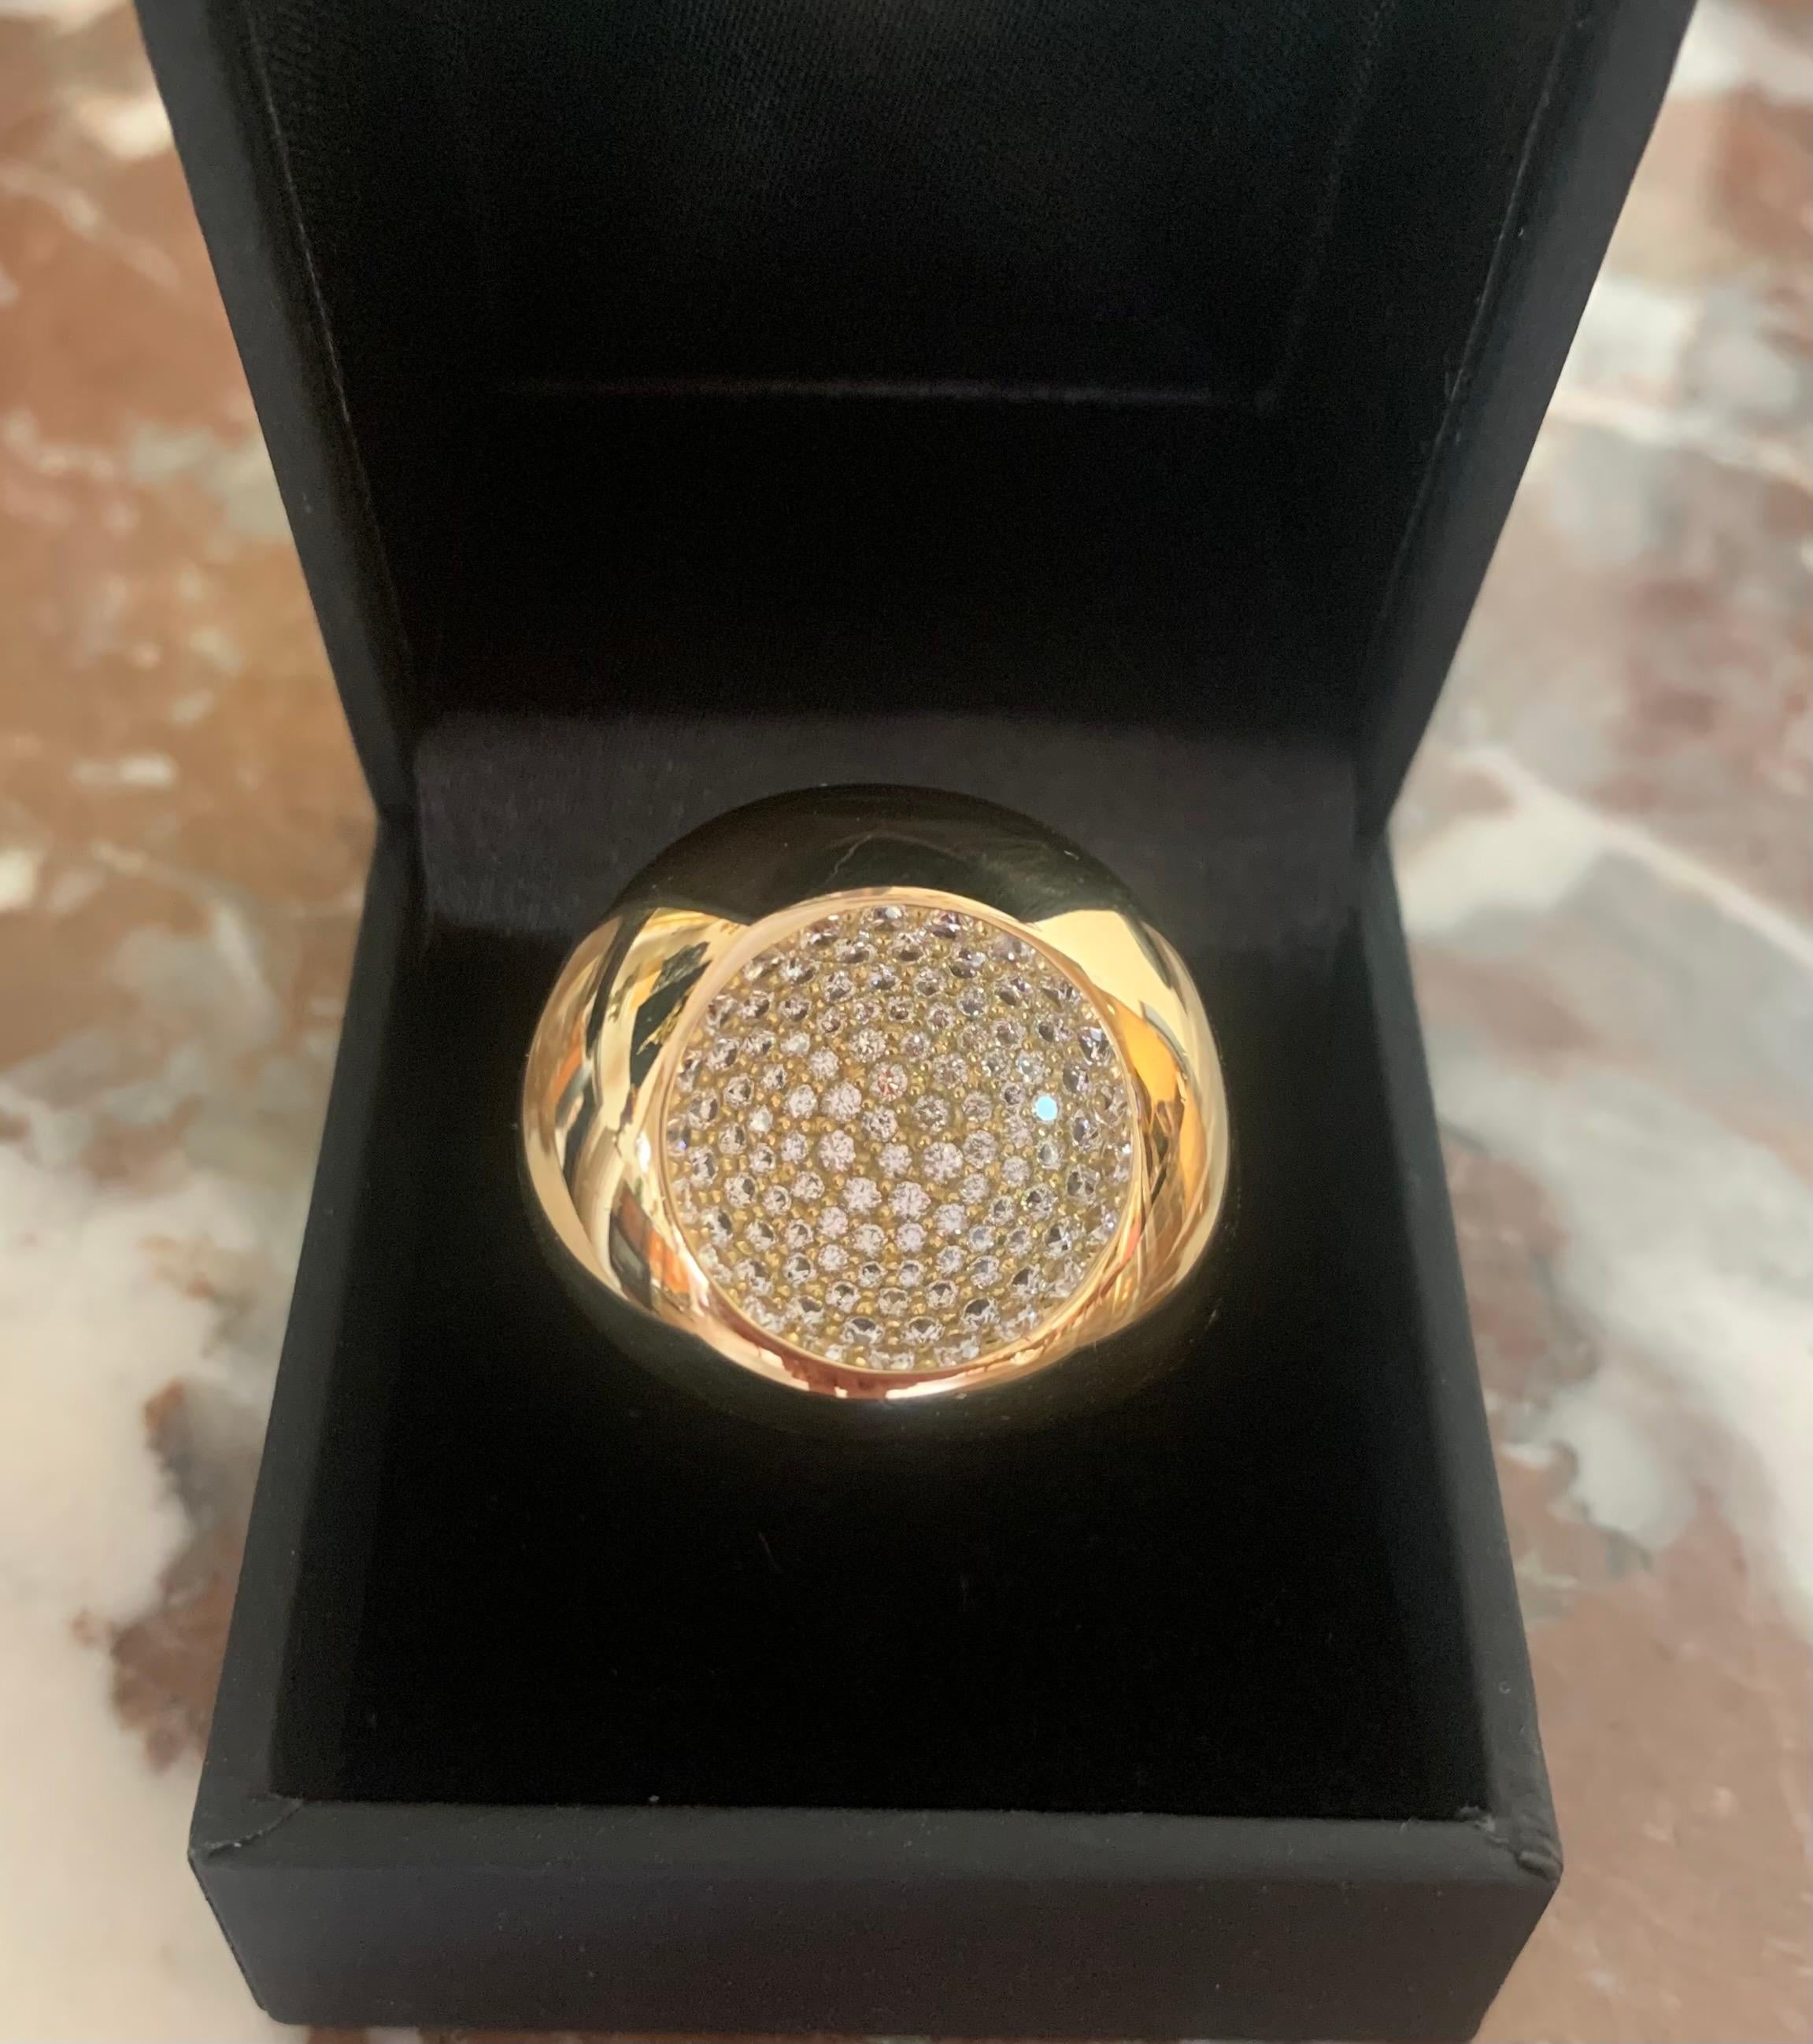 Beautiful organic oversized ring with 1.63 carats of diamonds from the Georg Jensen pave yellow gold collection designed by Jacqueline Rabun. This model is a limited edition from 2001. Stamped 1509.

Georg Jensen stamped 18 K

Ring size : 24.20 x